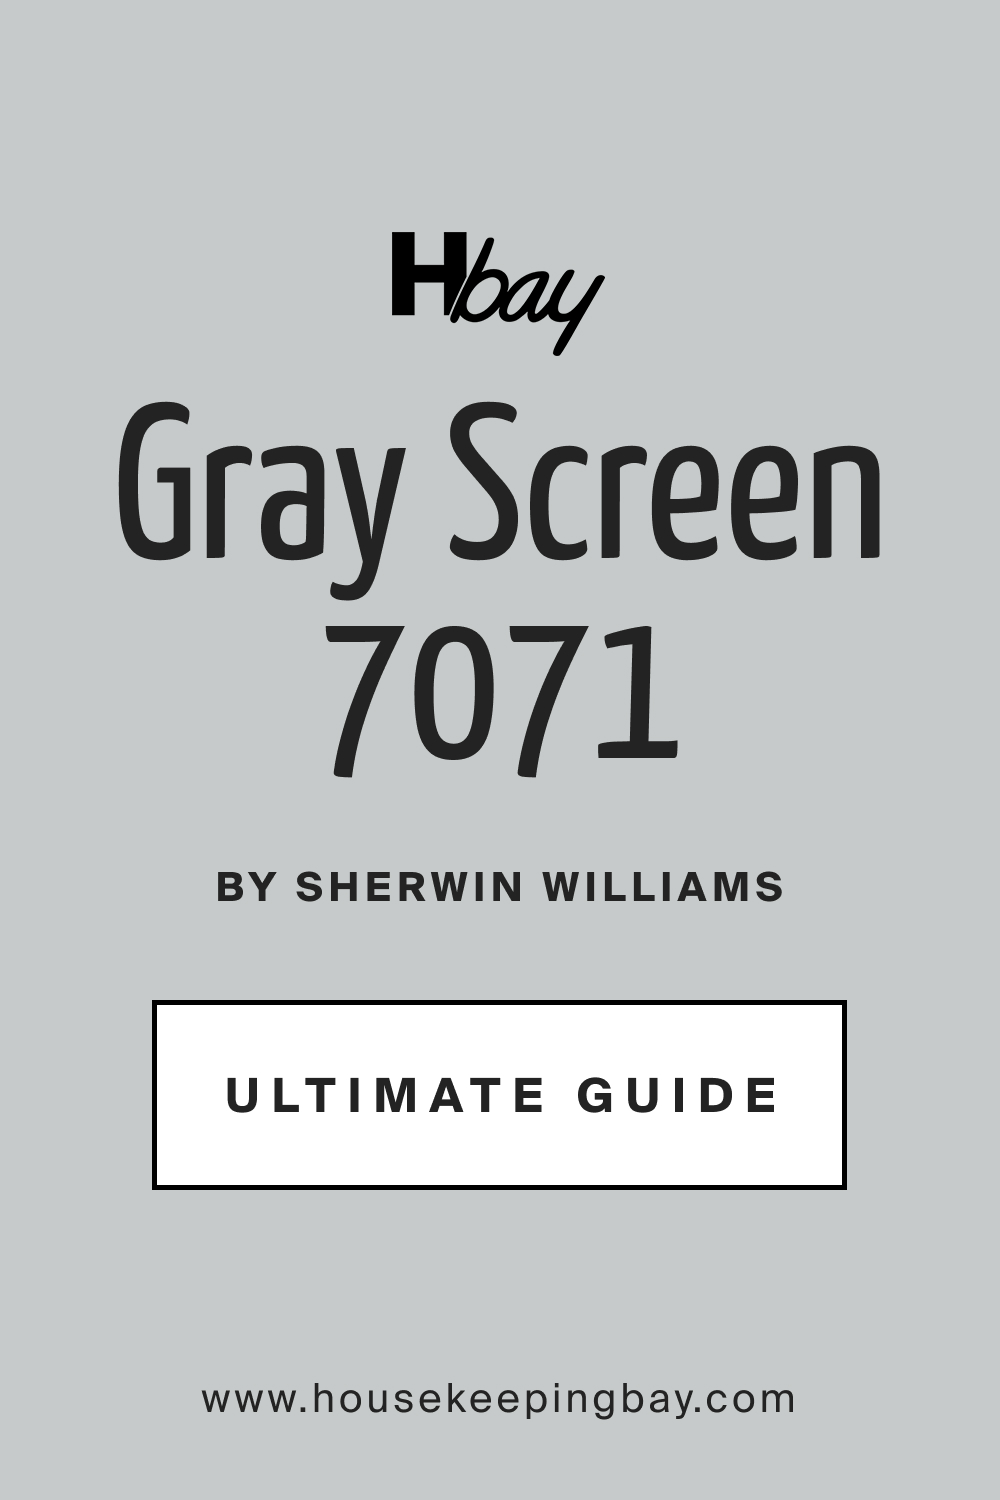 Gray Screen SW 7071 by Sherwin Williams Ultimate Guide